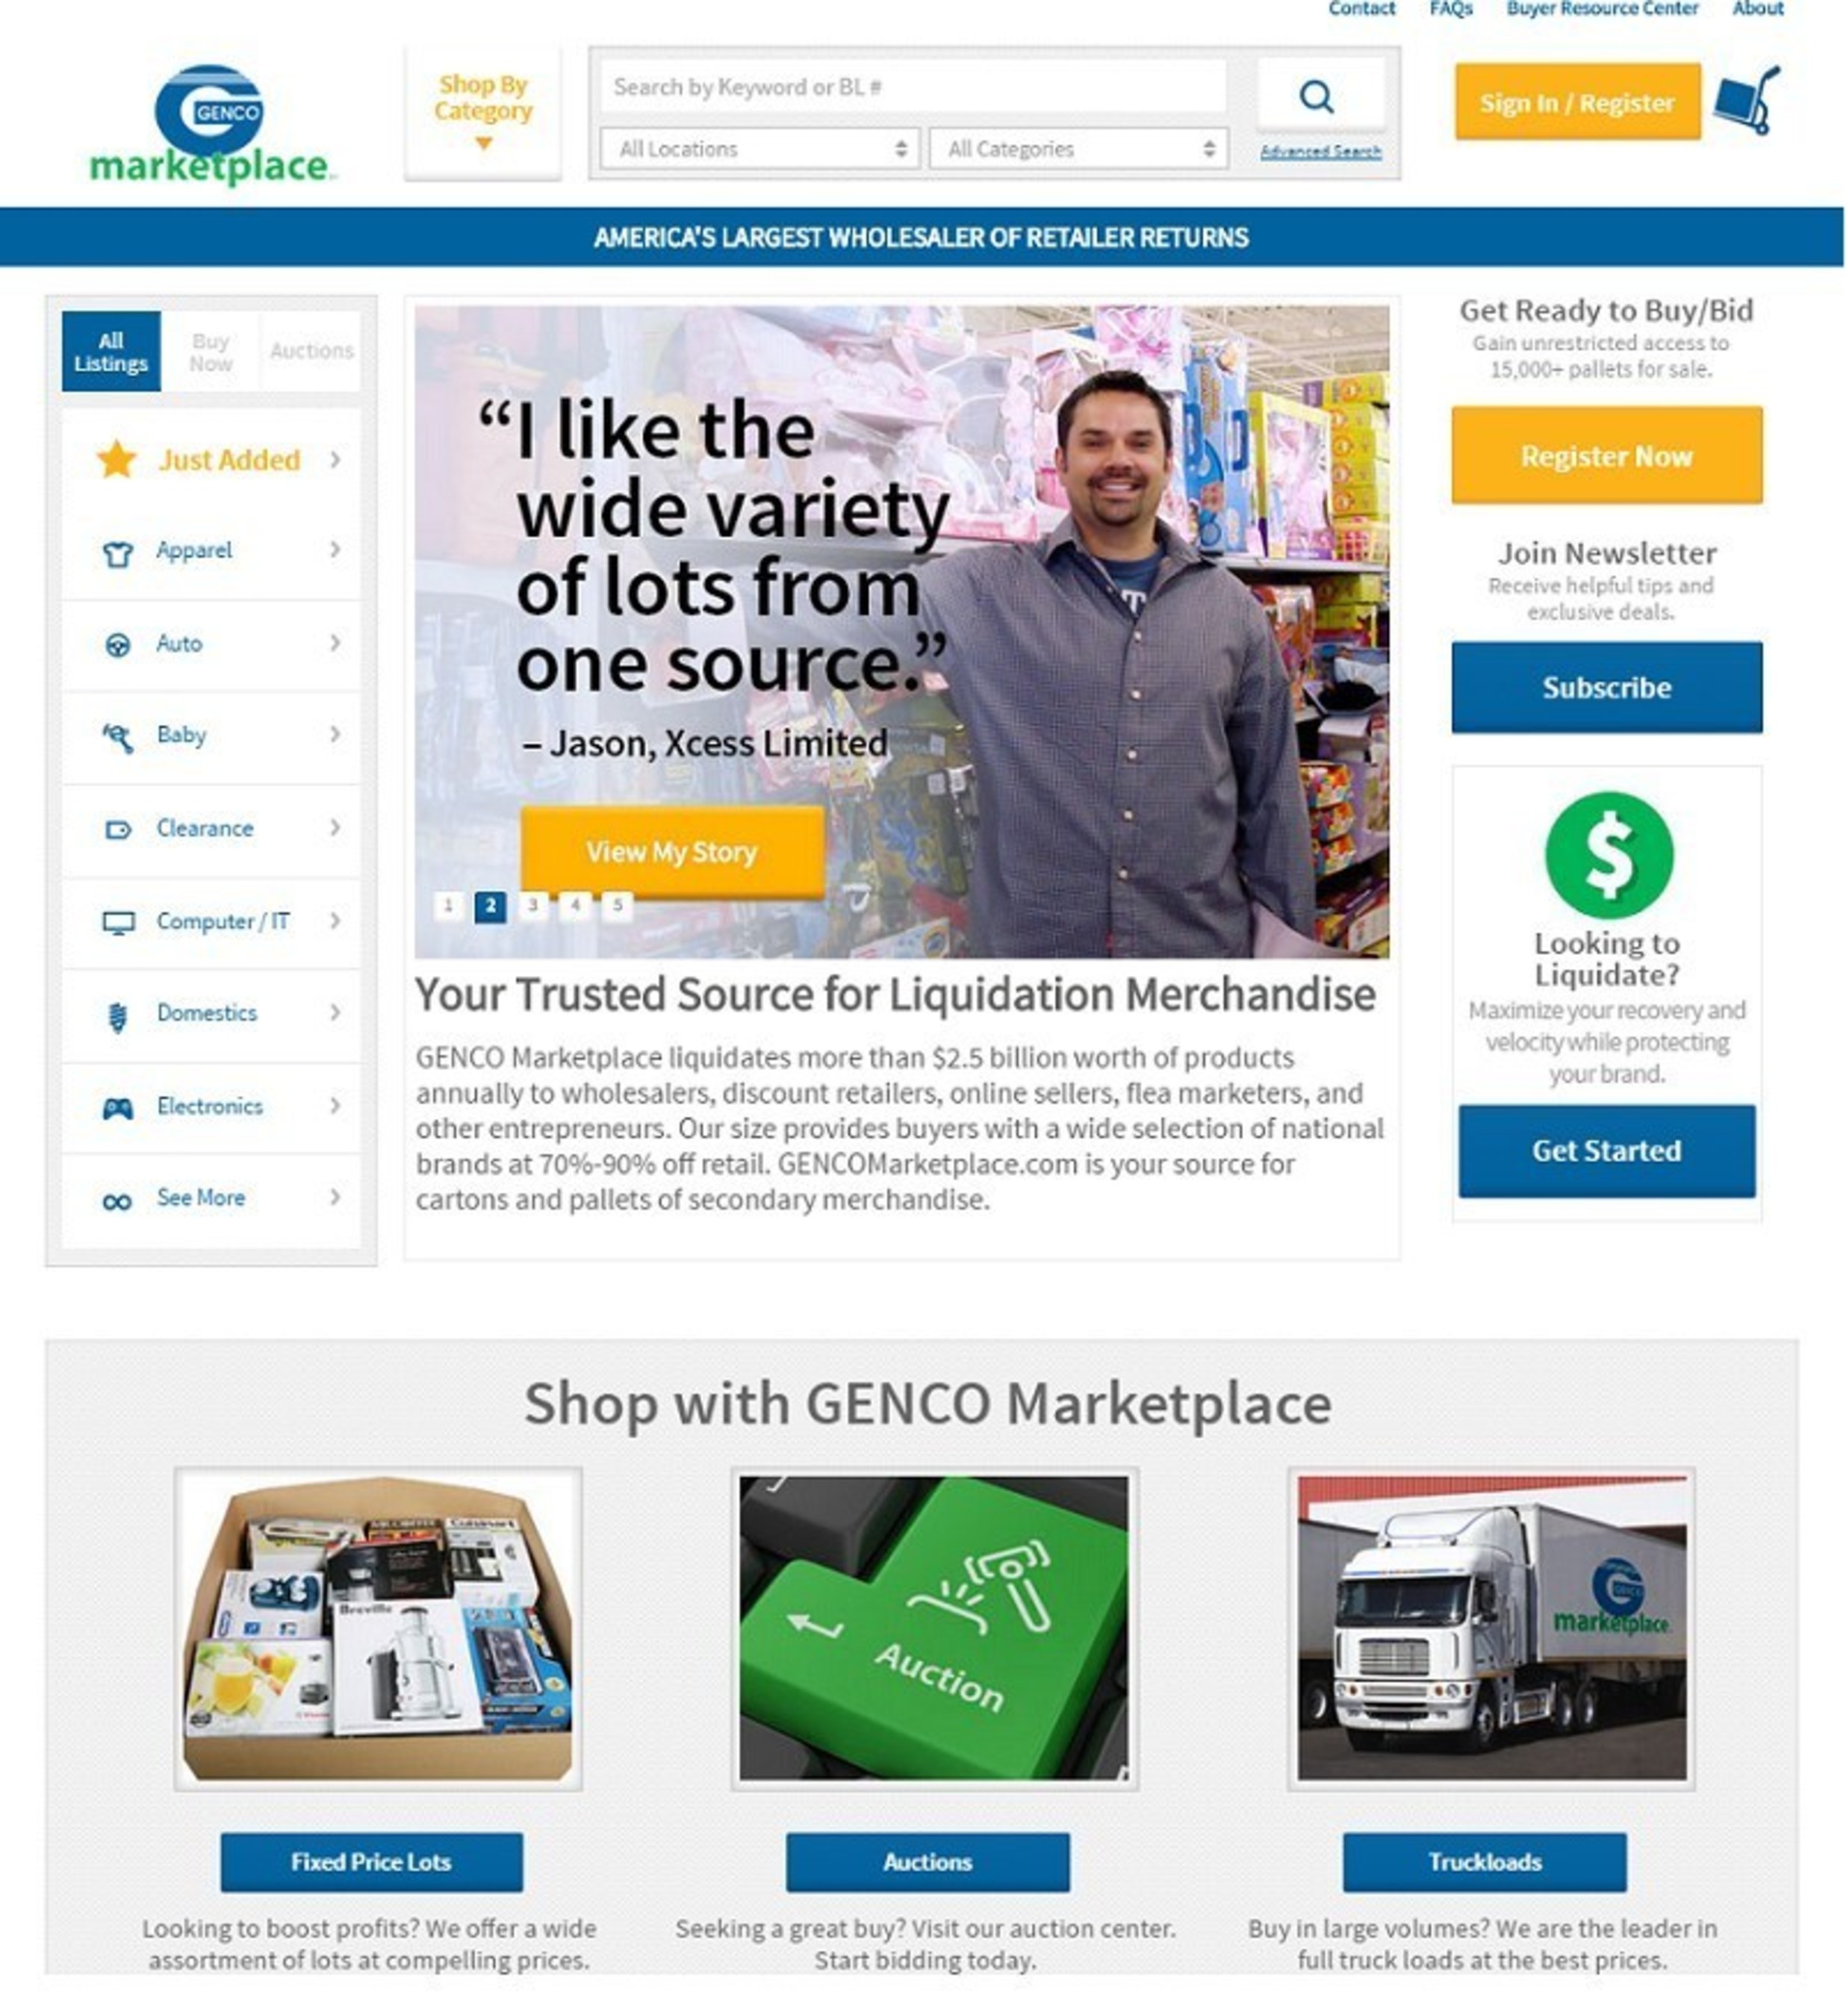 GENCO Marketplace recently re-launched their flagship business-to-business website.